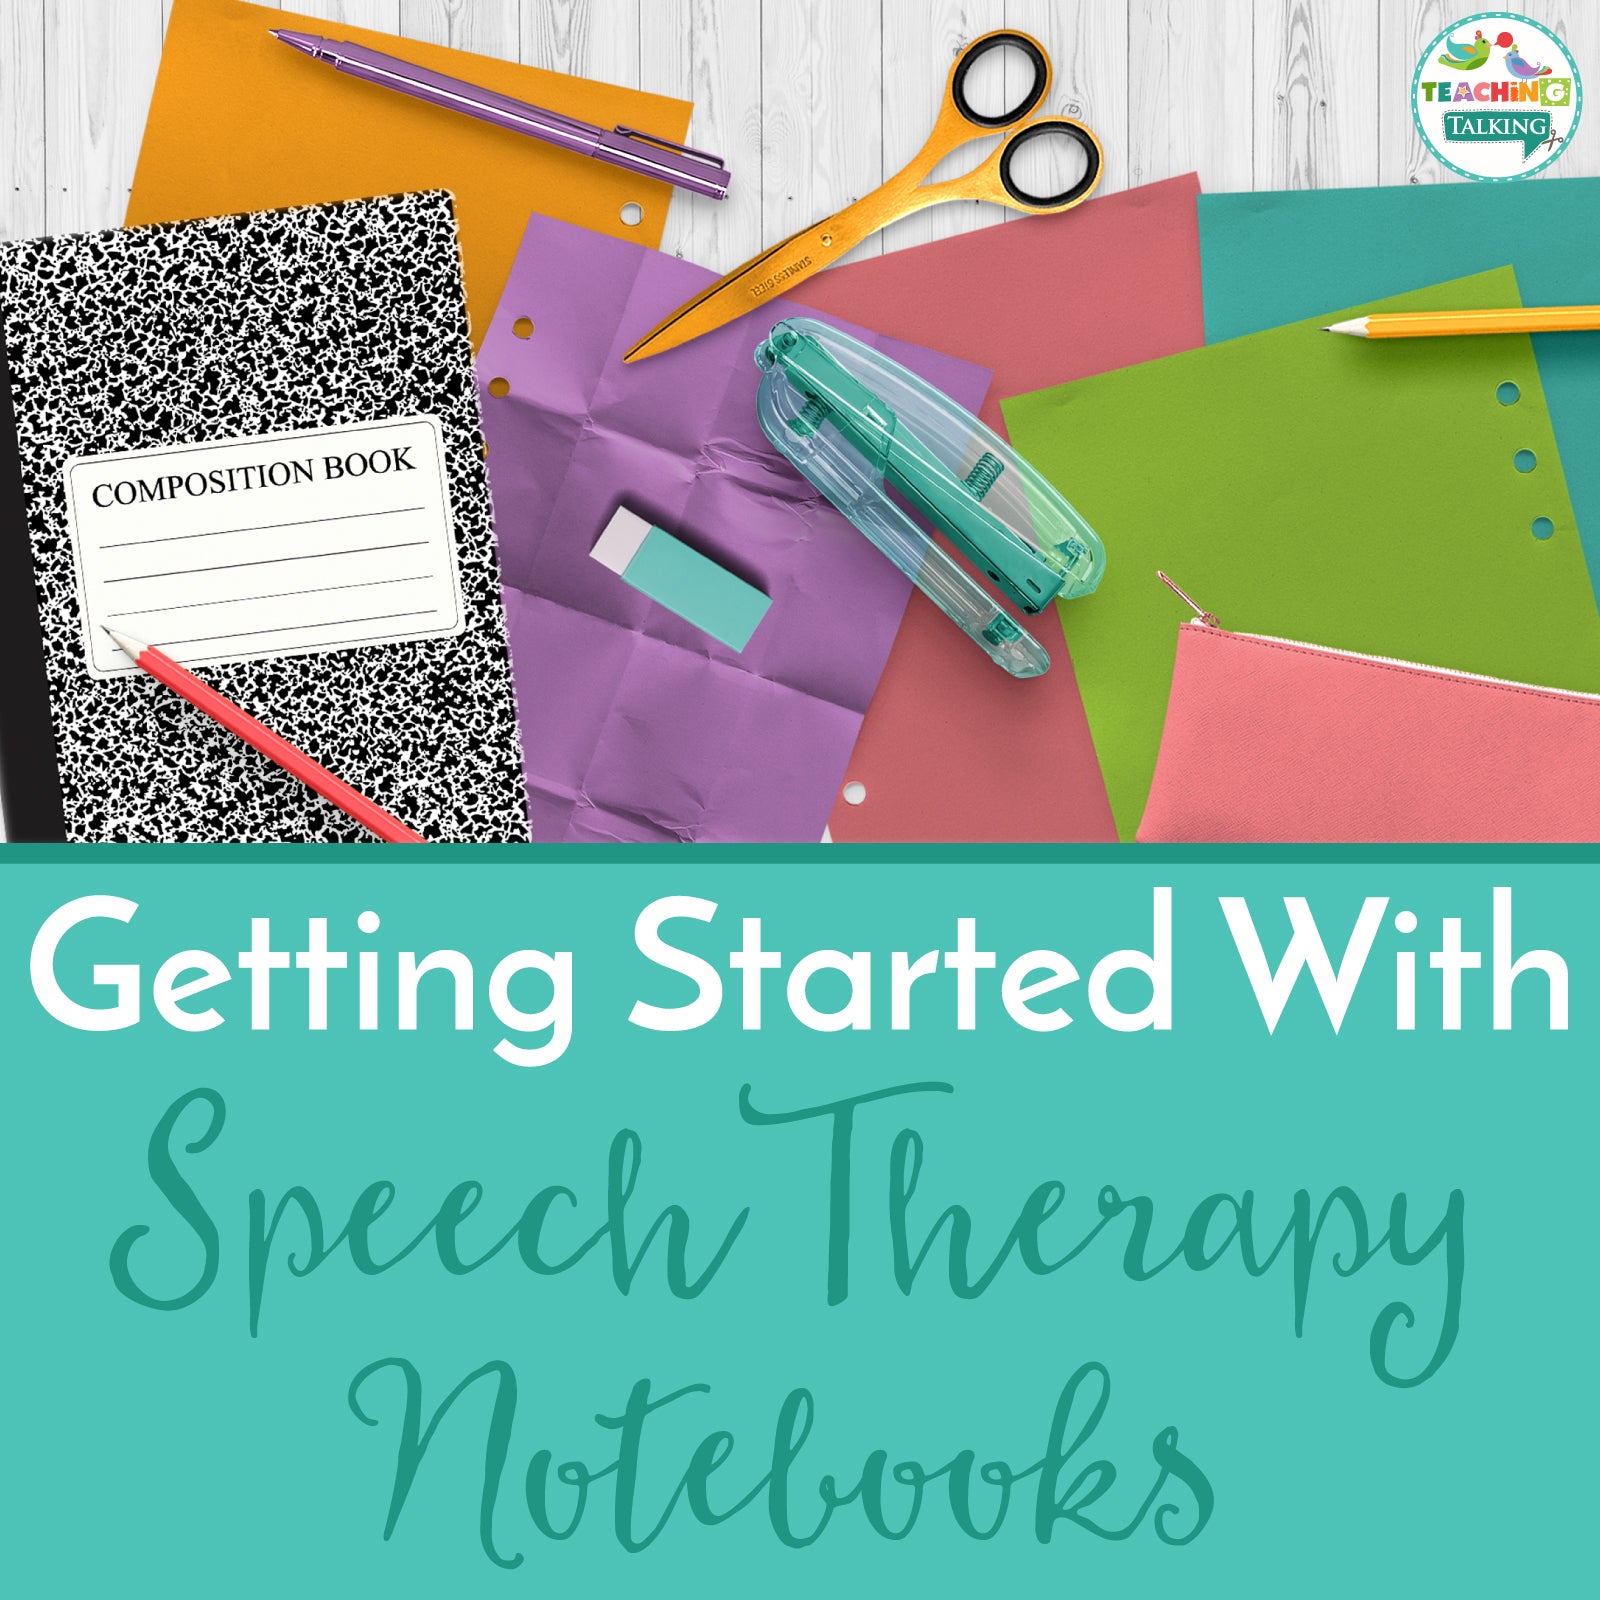 Starting Speech Therapy Notebooks Made Quick and Easy